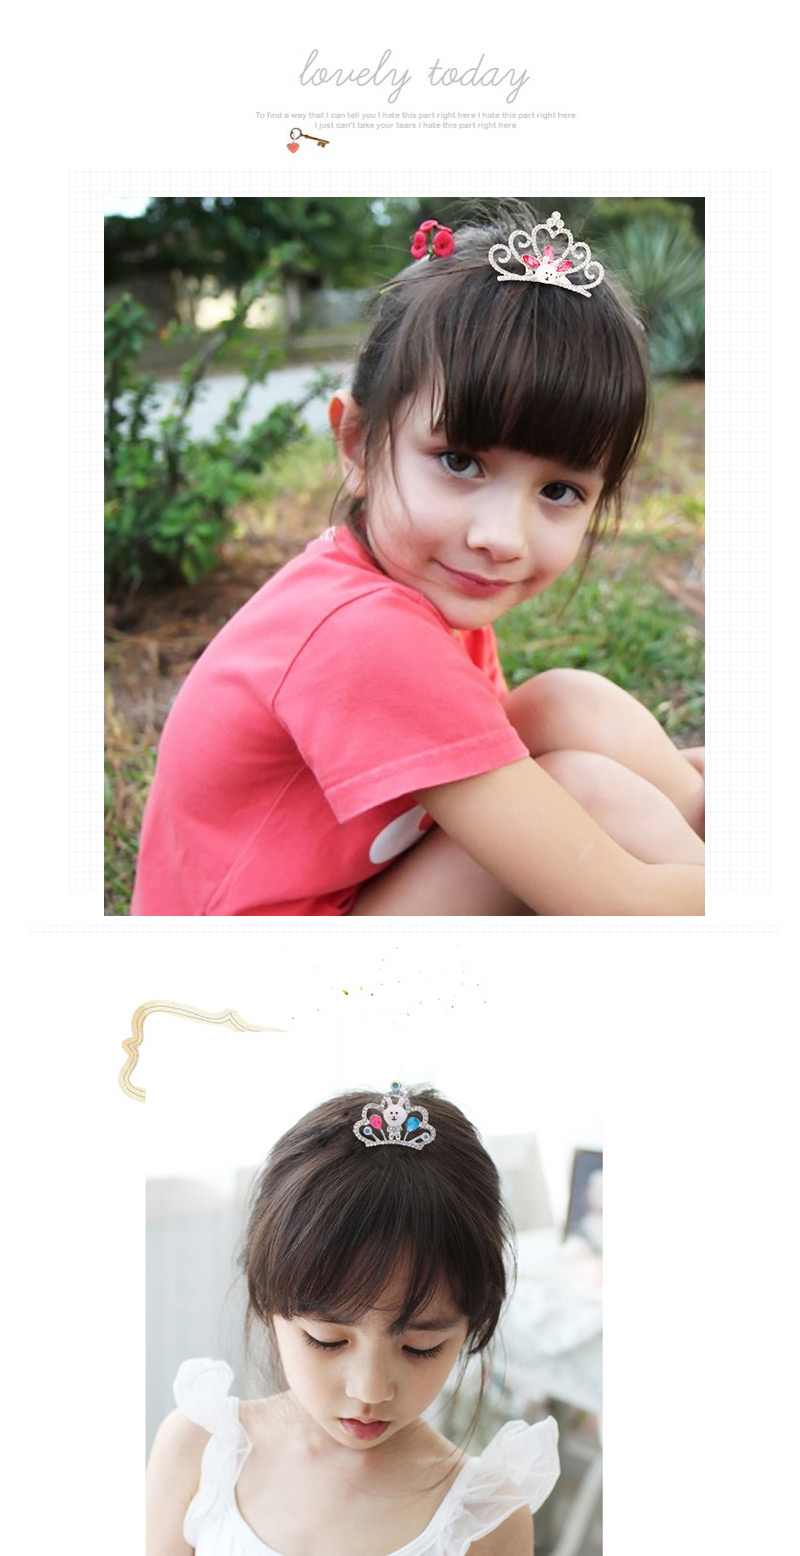 Lovely Blue Crown Shape Design Child Hair Hoop(small),Kids Accessories